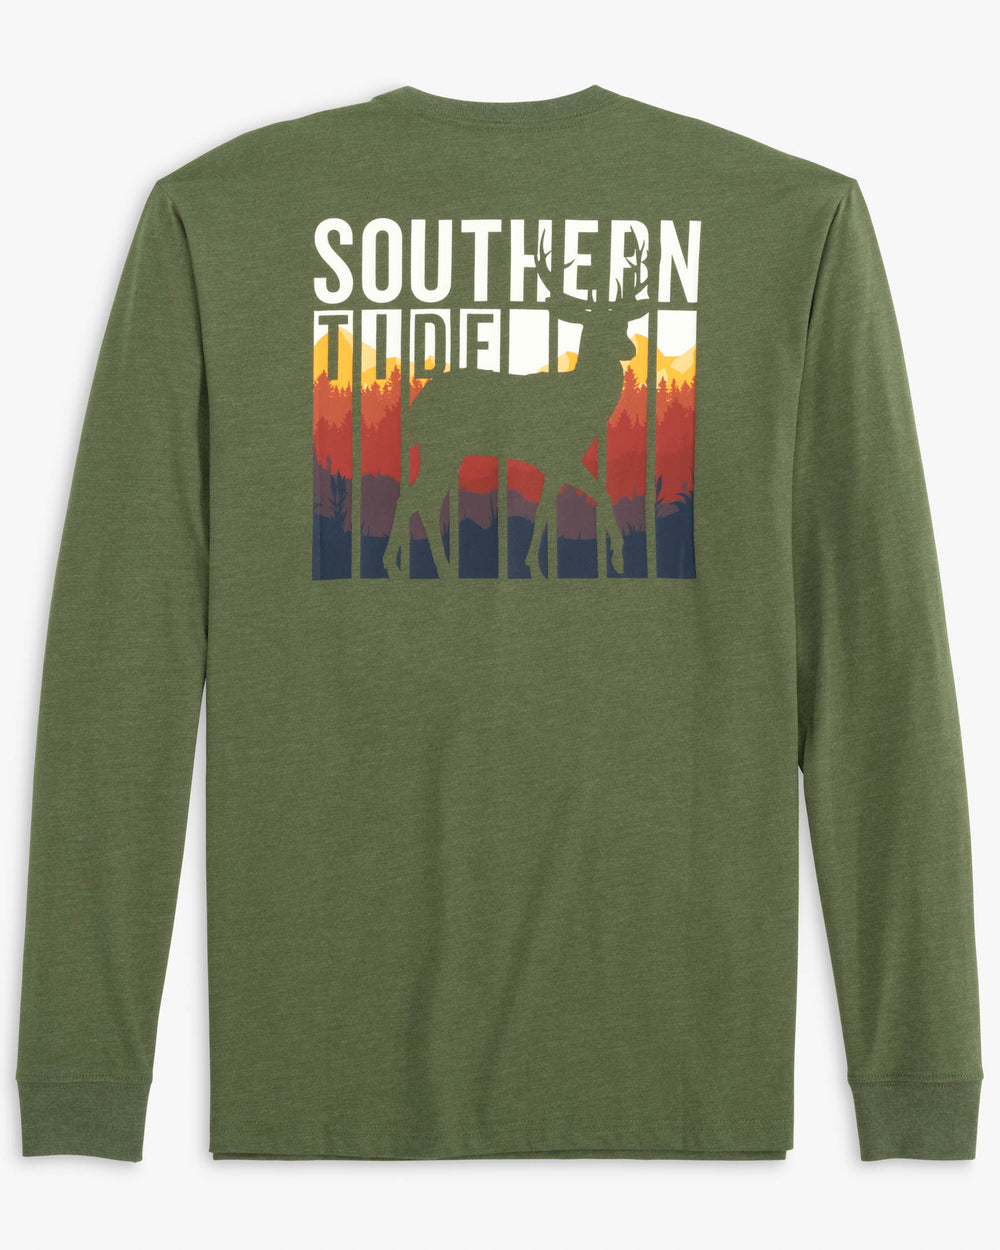 The back view of the Southern Tide Heather Prey Landscape Series Long Sleeve T-Shirt Deer by Southern Tide - Heather Hunter Green